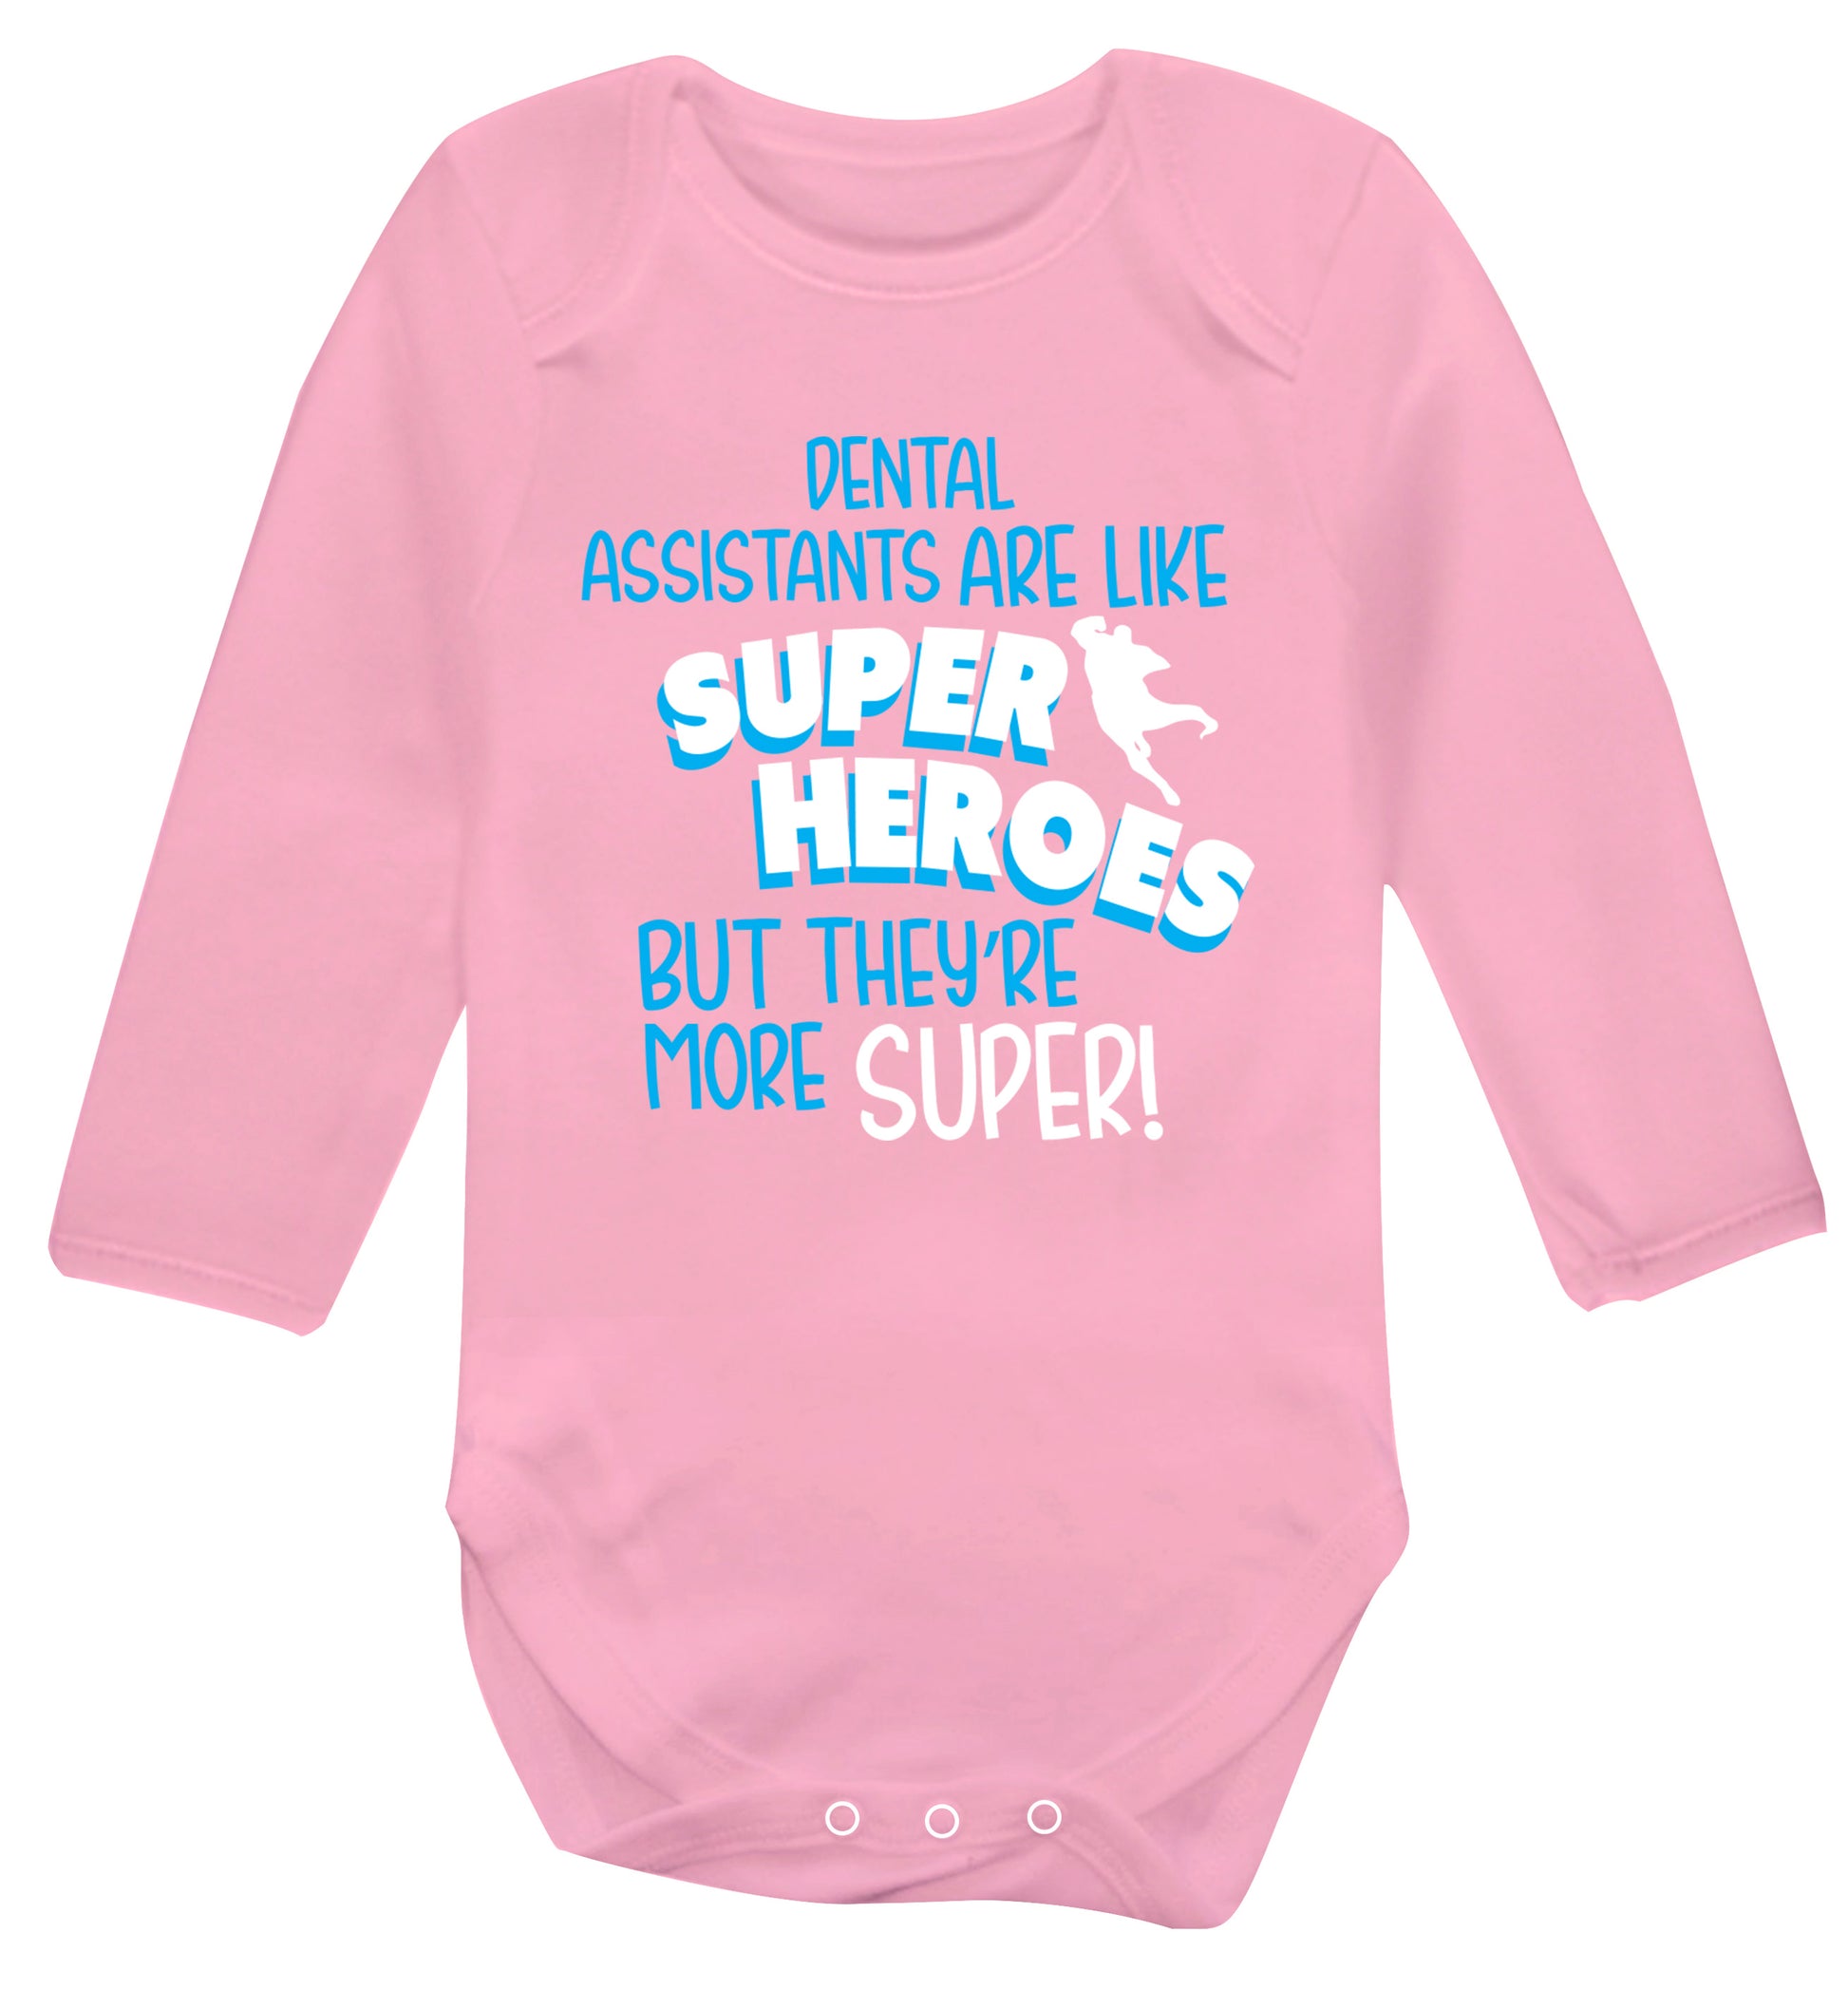 Dental Assistants are like superheros but they're more super Baby Vest long sleeved pale pink 6-12 months